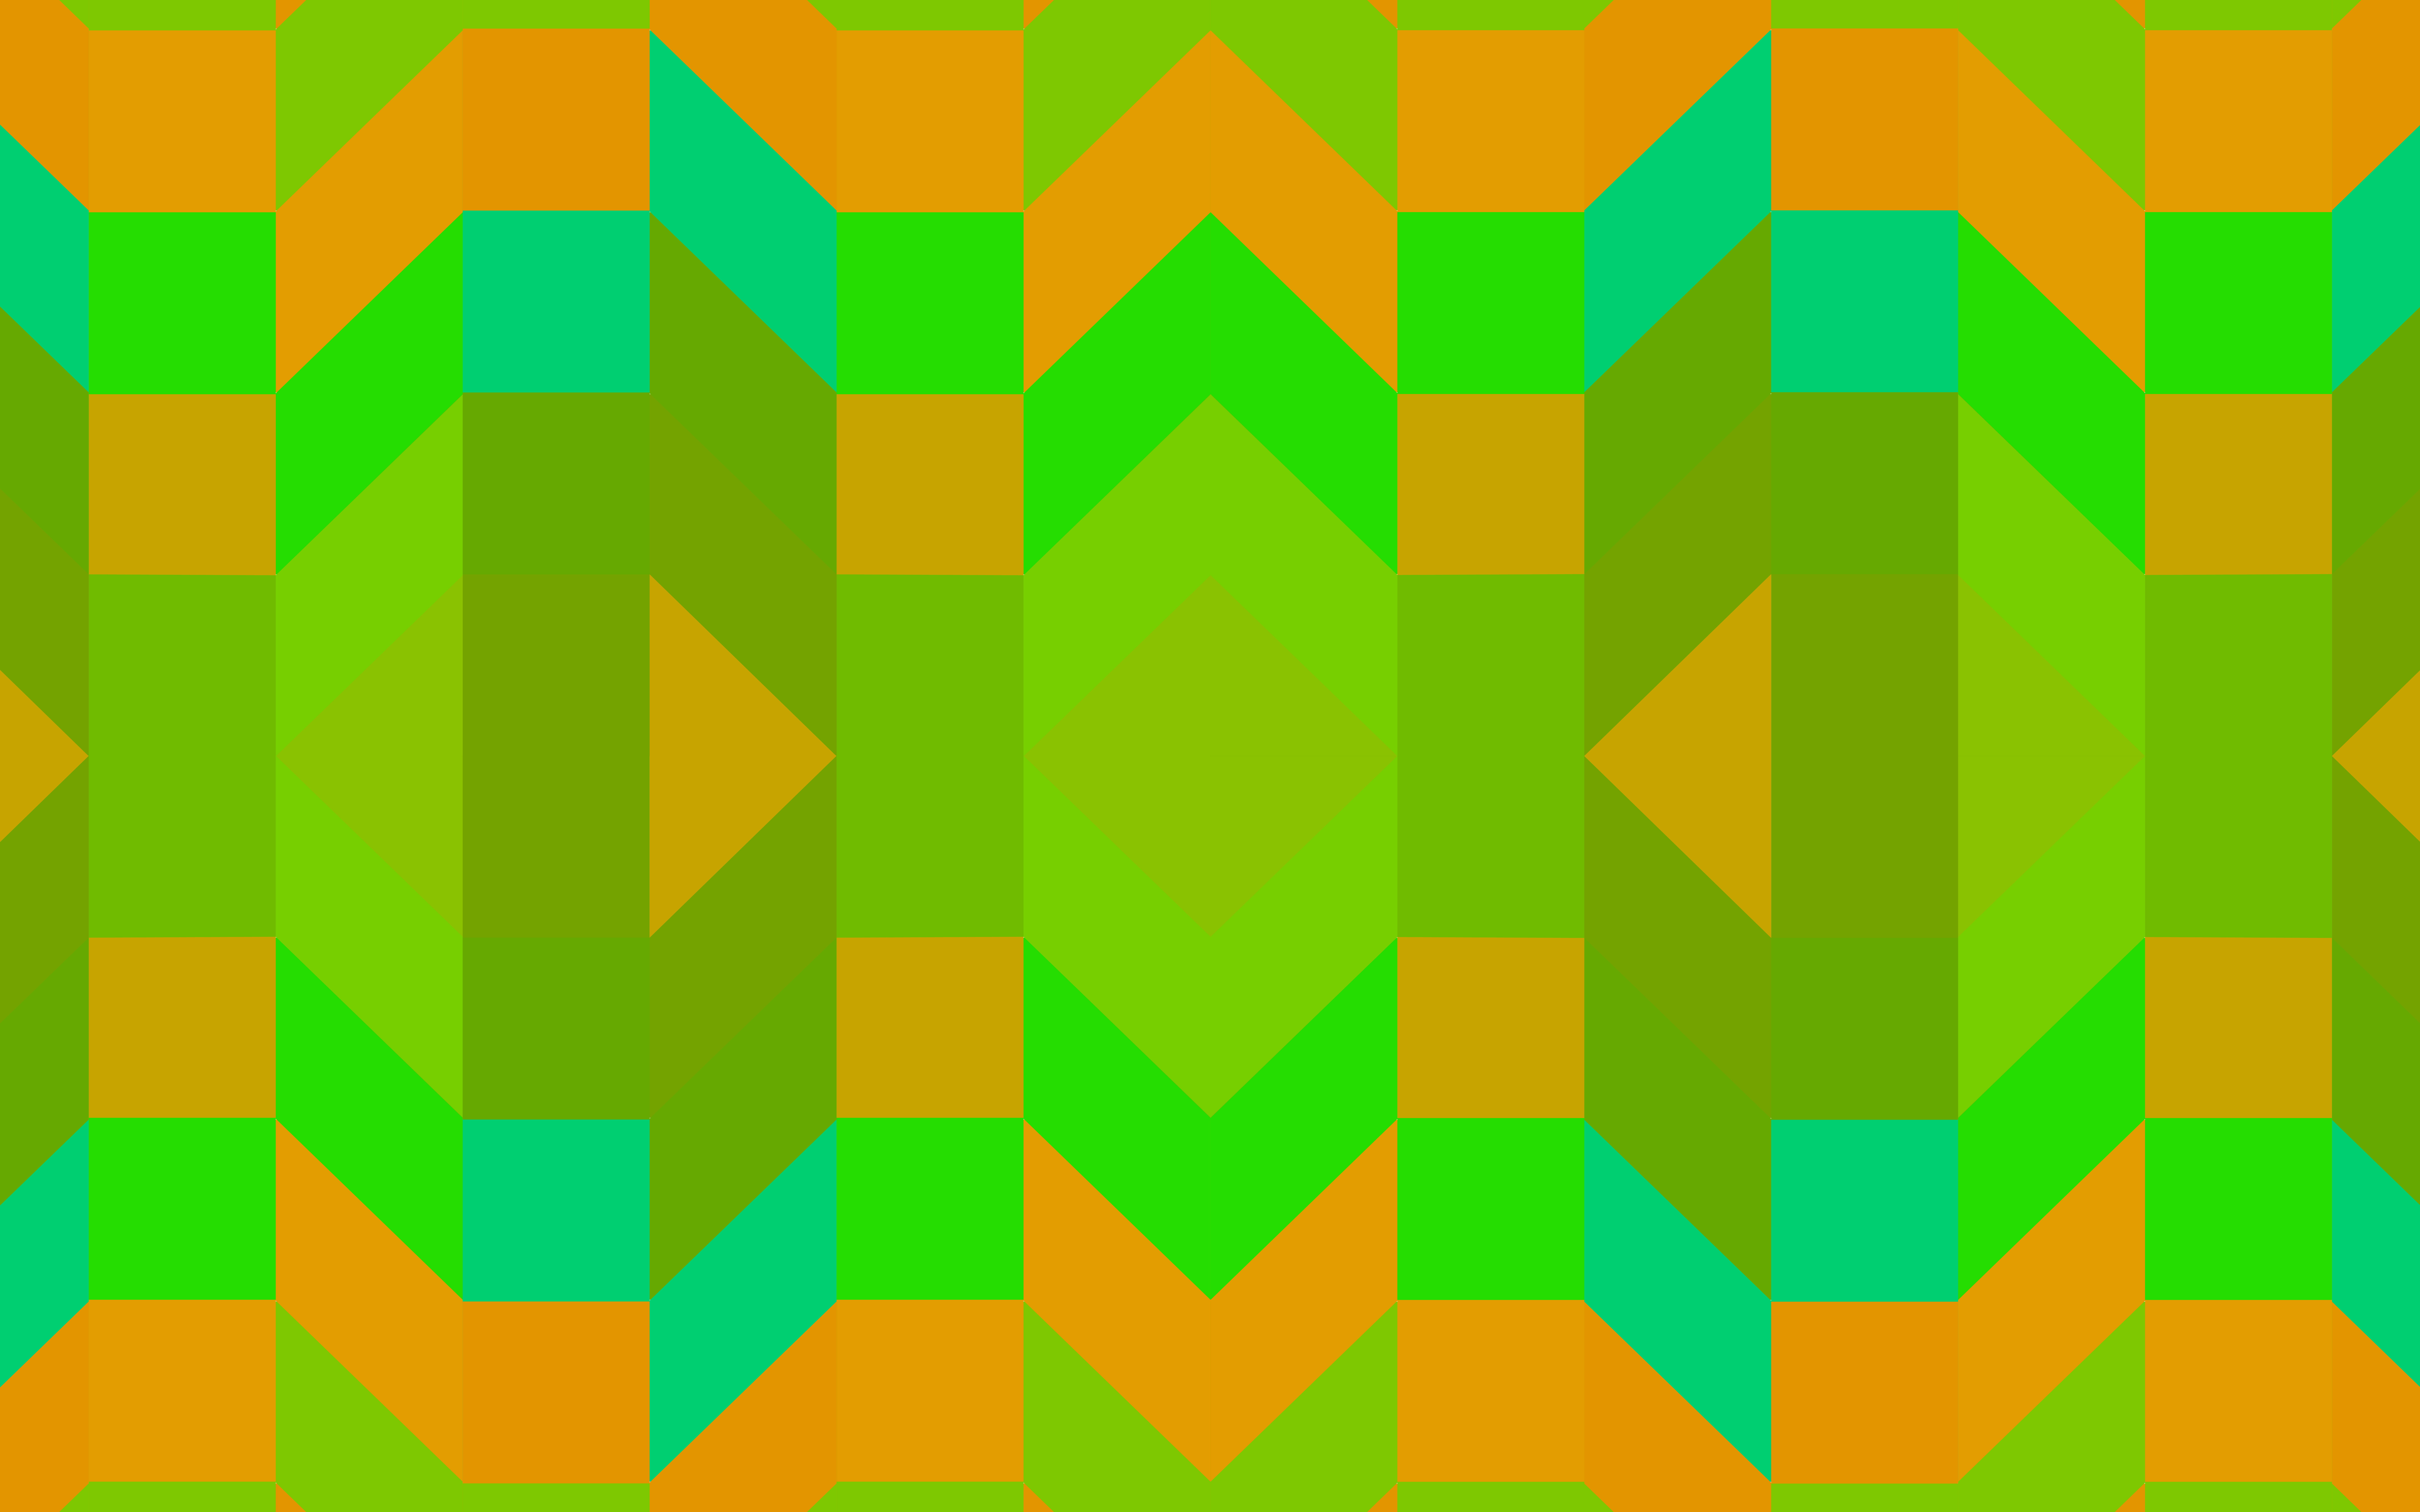 graphic design, symmetry, green color, multi colored, full frame